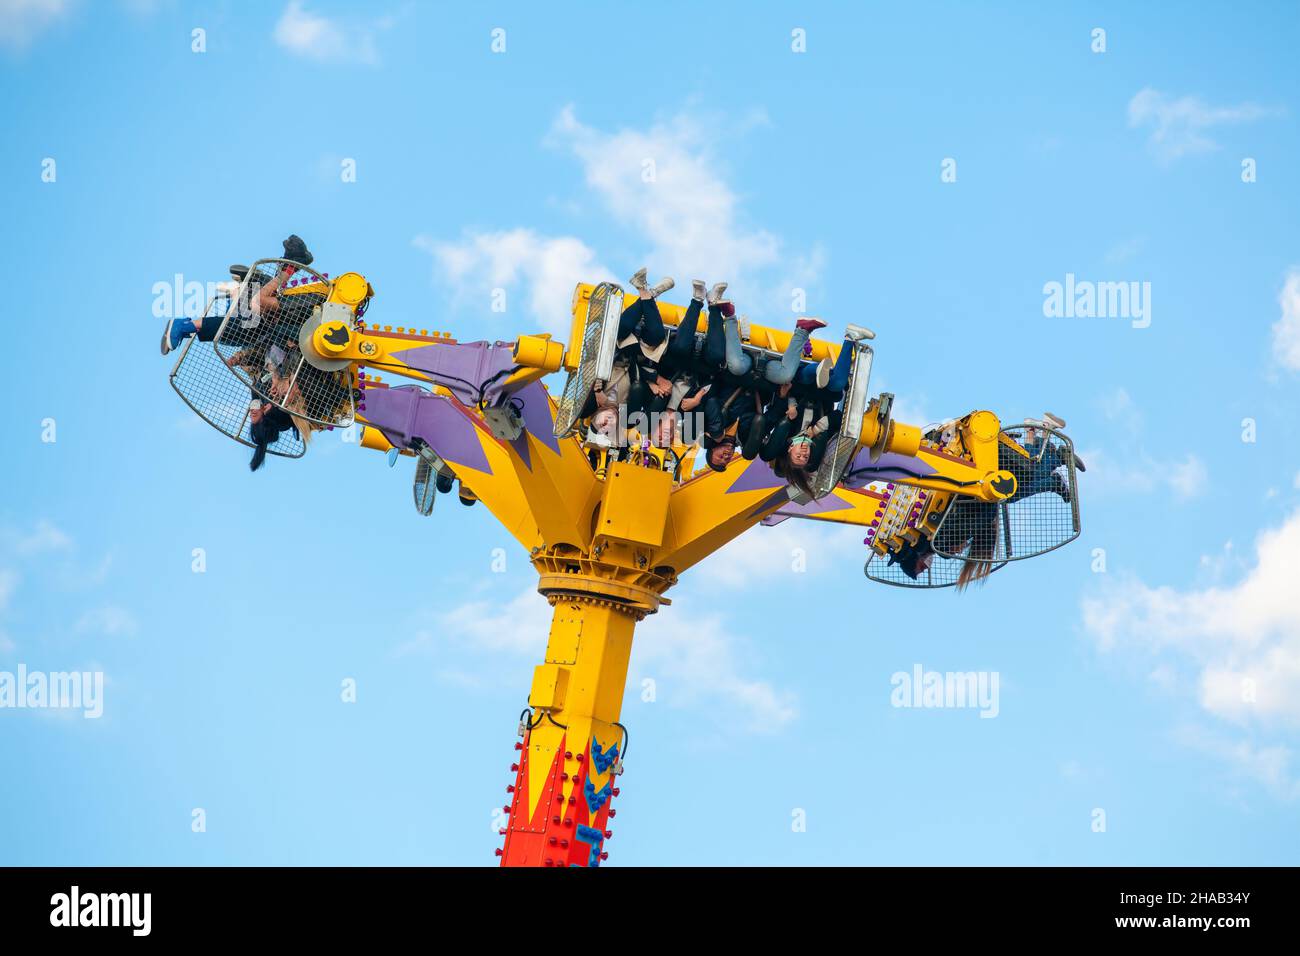 Ankara-Turkey:October 3, 2021: Group of screaming people levitating and turning in the air on a thrilling attraction at luna park | Genclik Parki in A Stock Photo